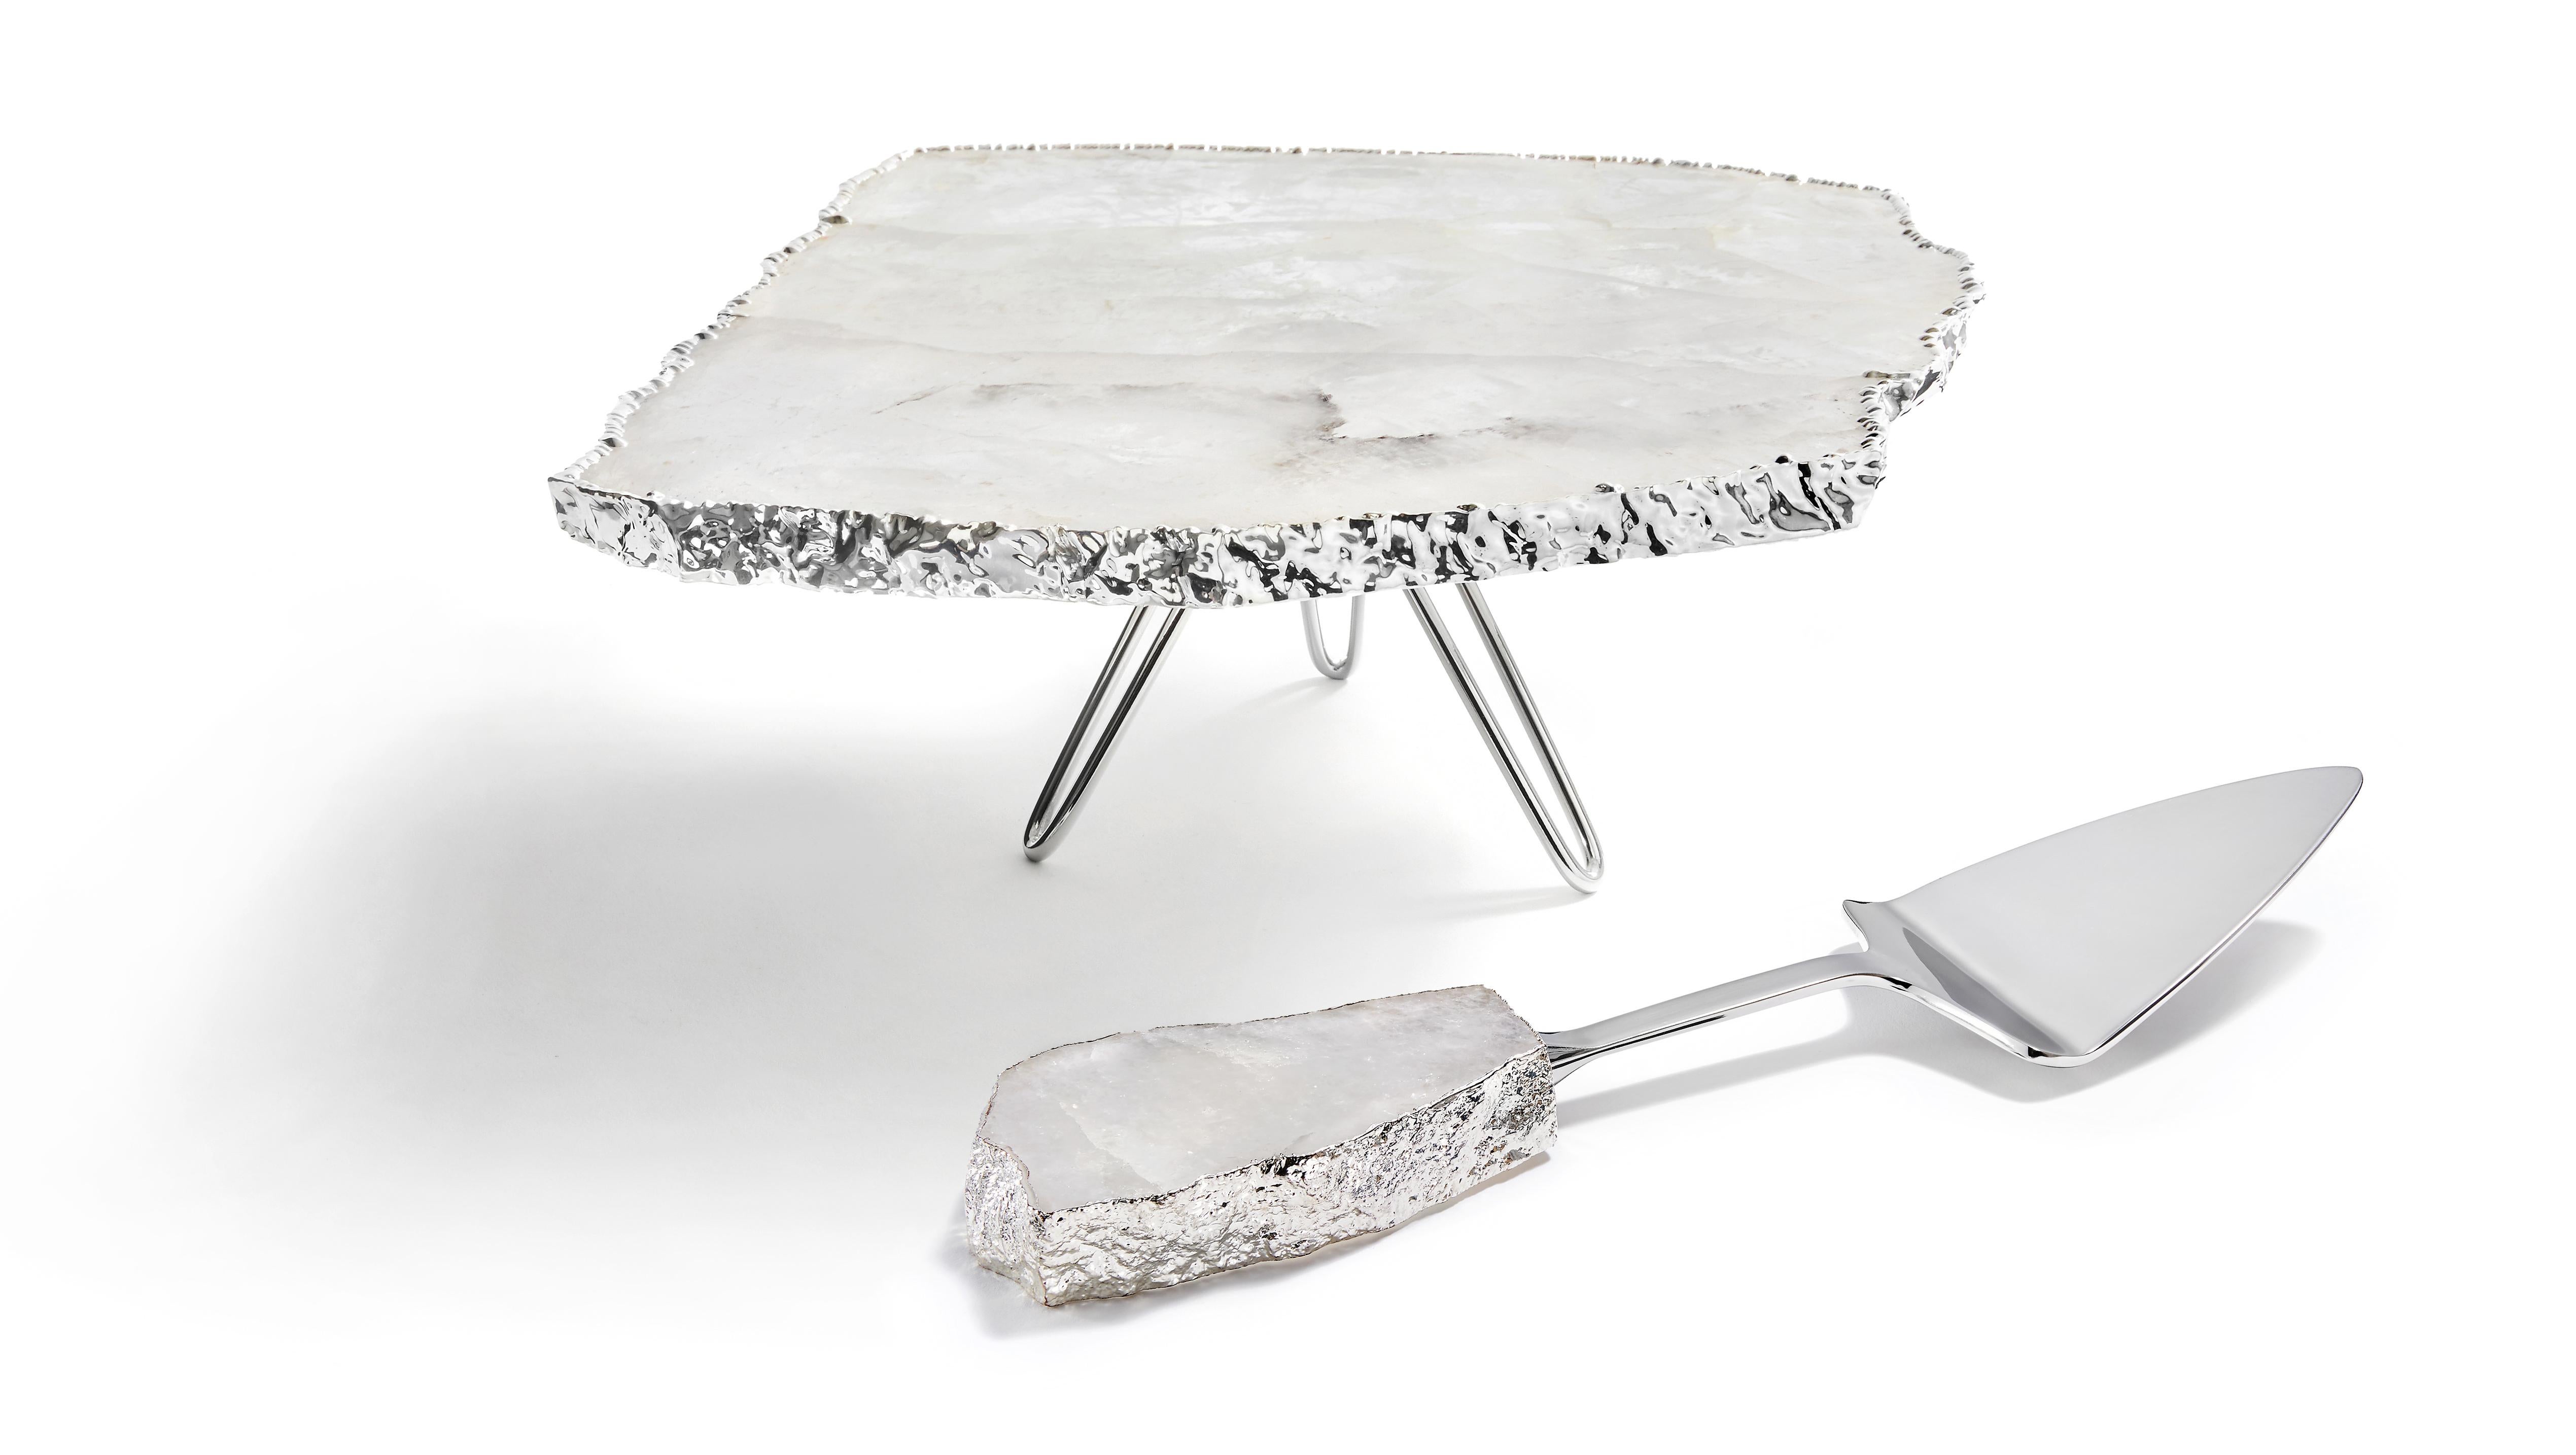 Our Torta Cake Servers elevate the serving experience.  Paired with our Torta Cake Platters, even the humblest of cakes seems precious when offered by our matching Cake Servers.  Made of crystal, with pure silver electroplated edges, and a stainless